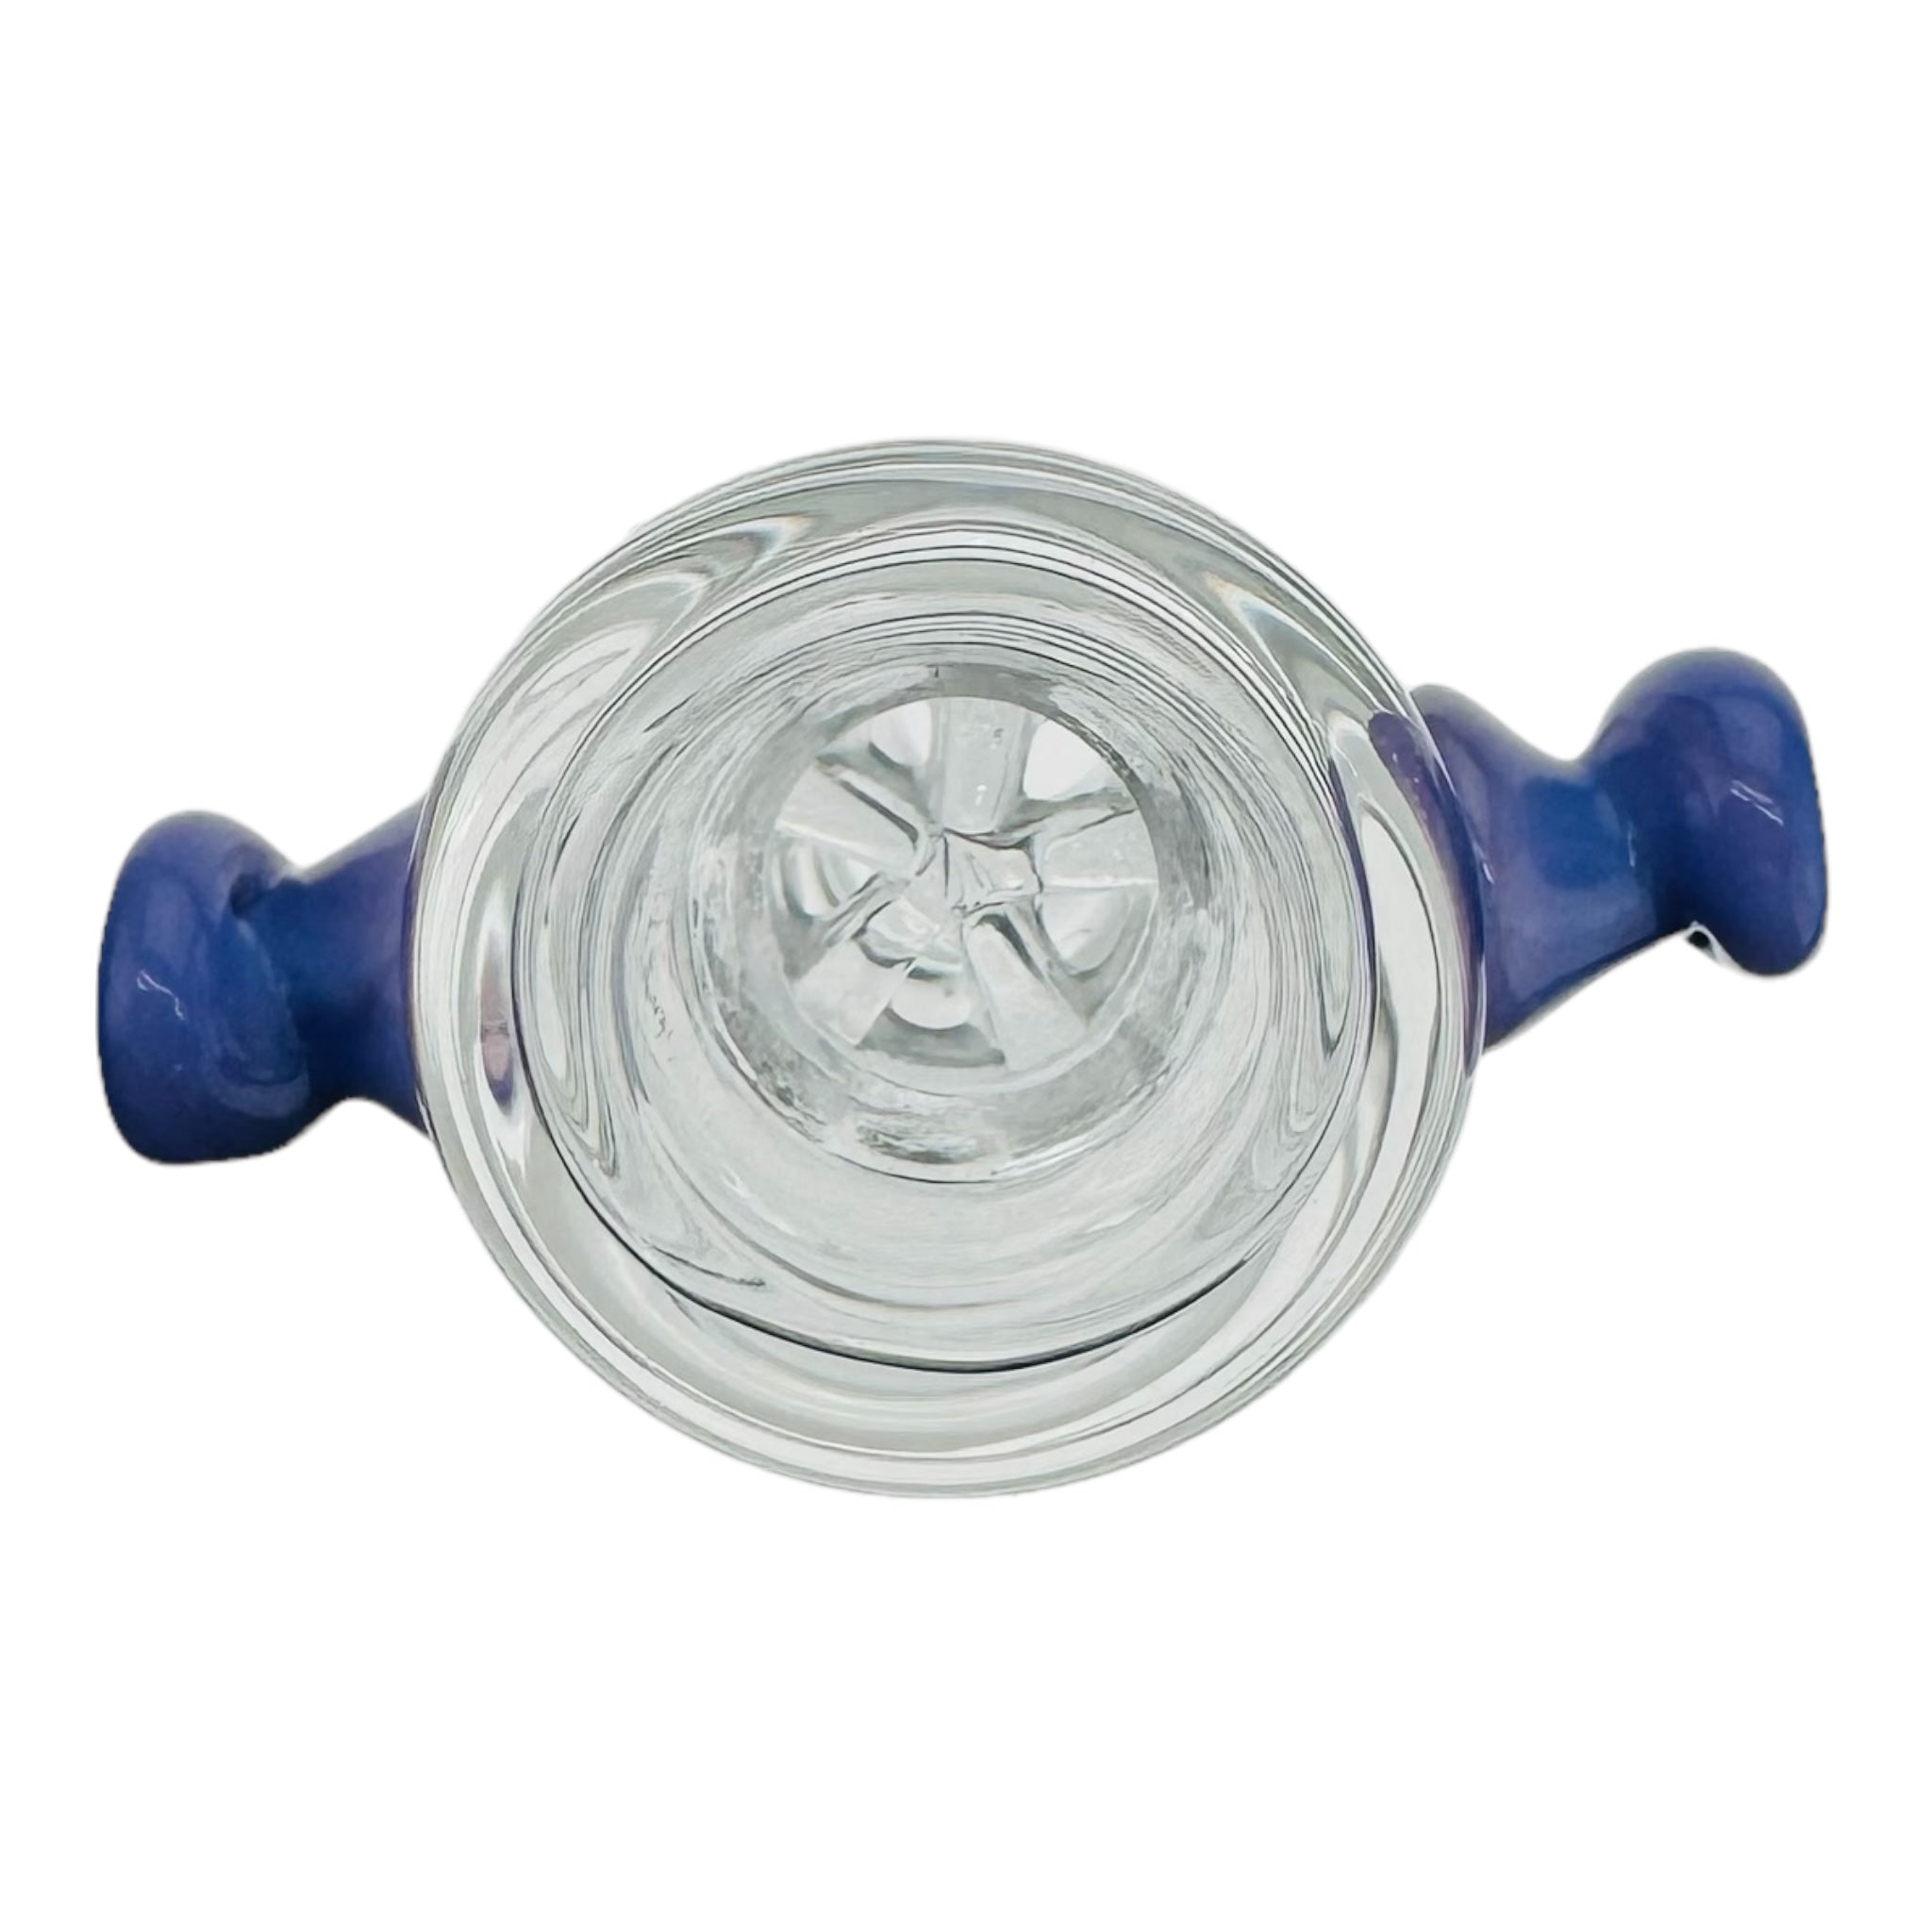 14mm Bong Bowl With Built In Multi Hole Screen Purple Handles for sale